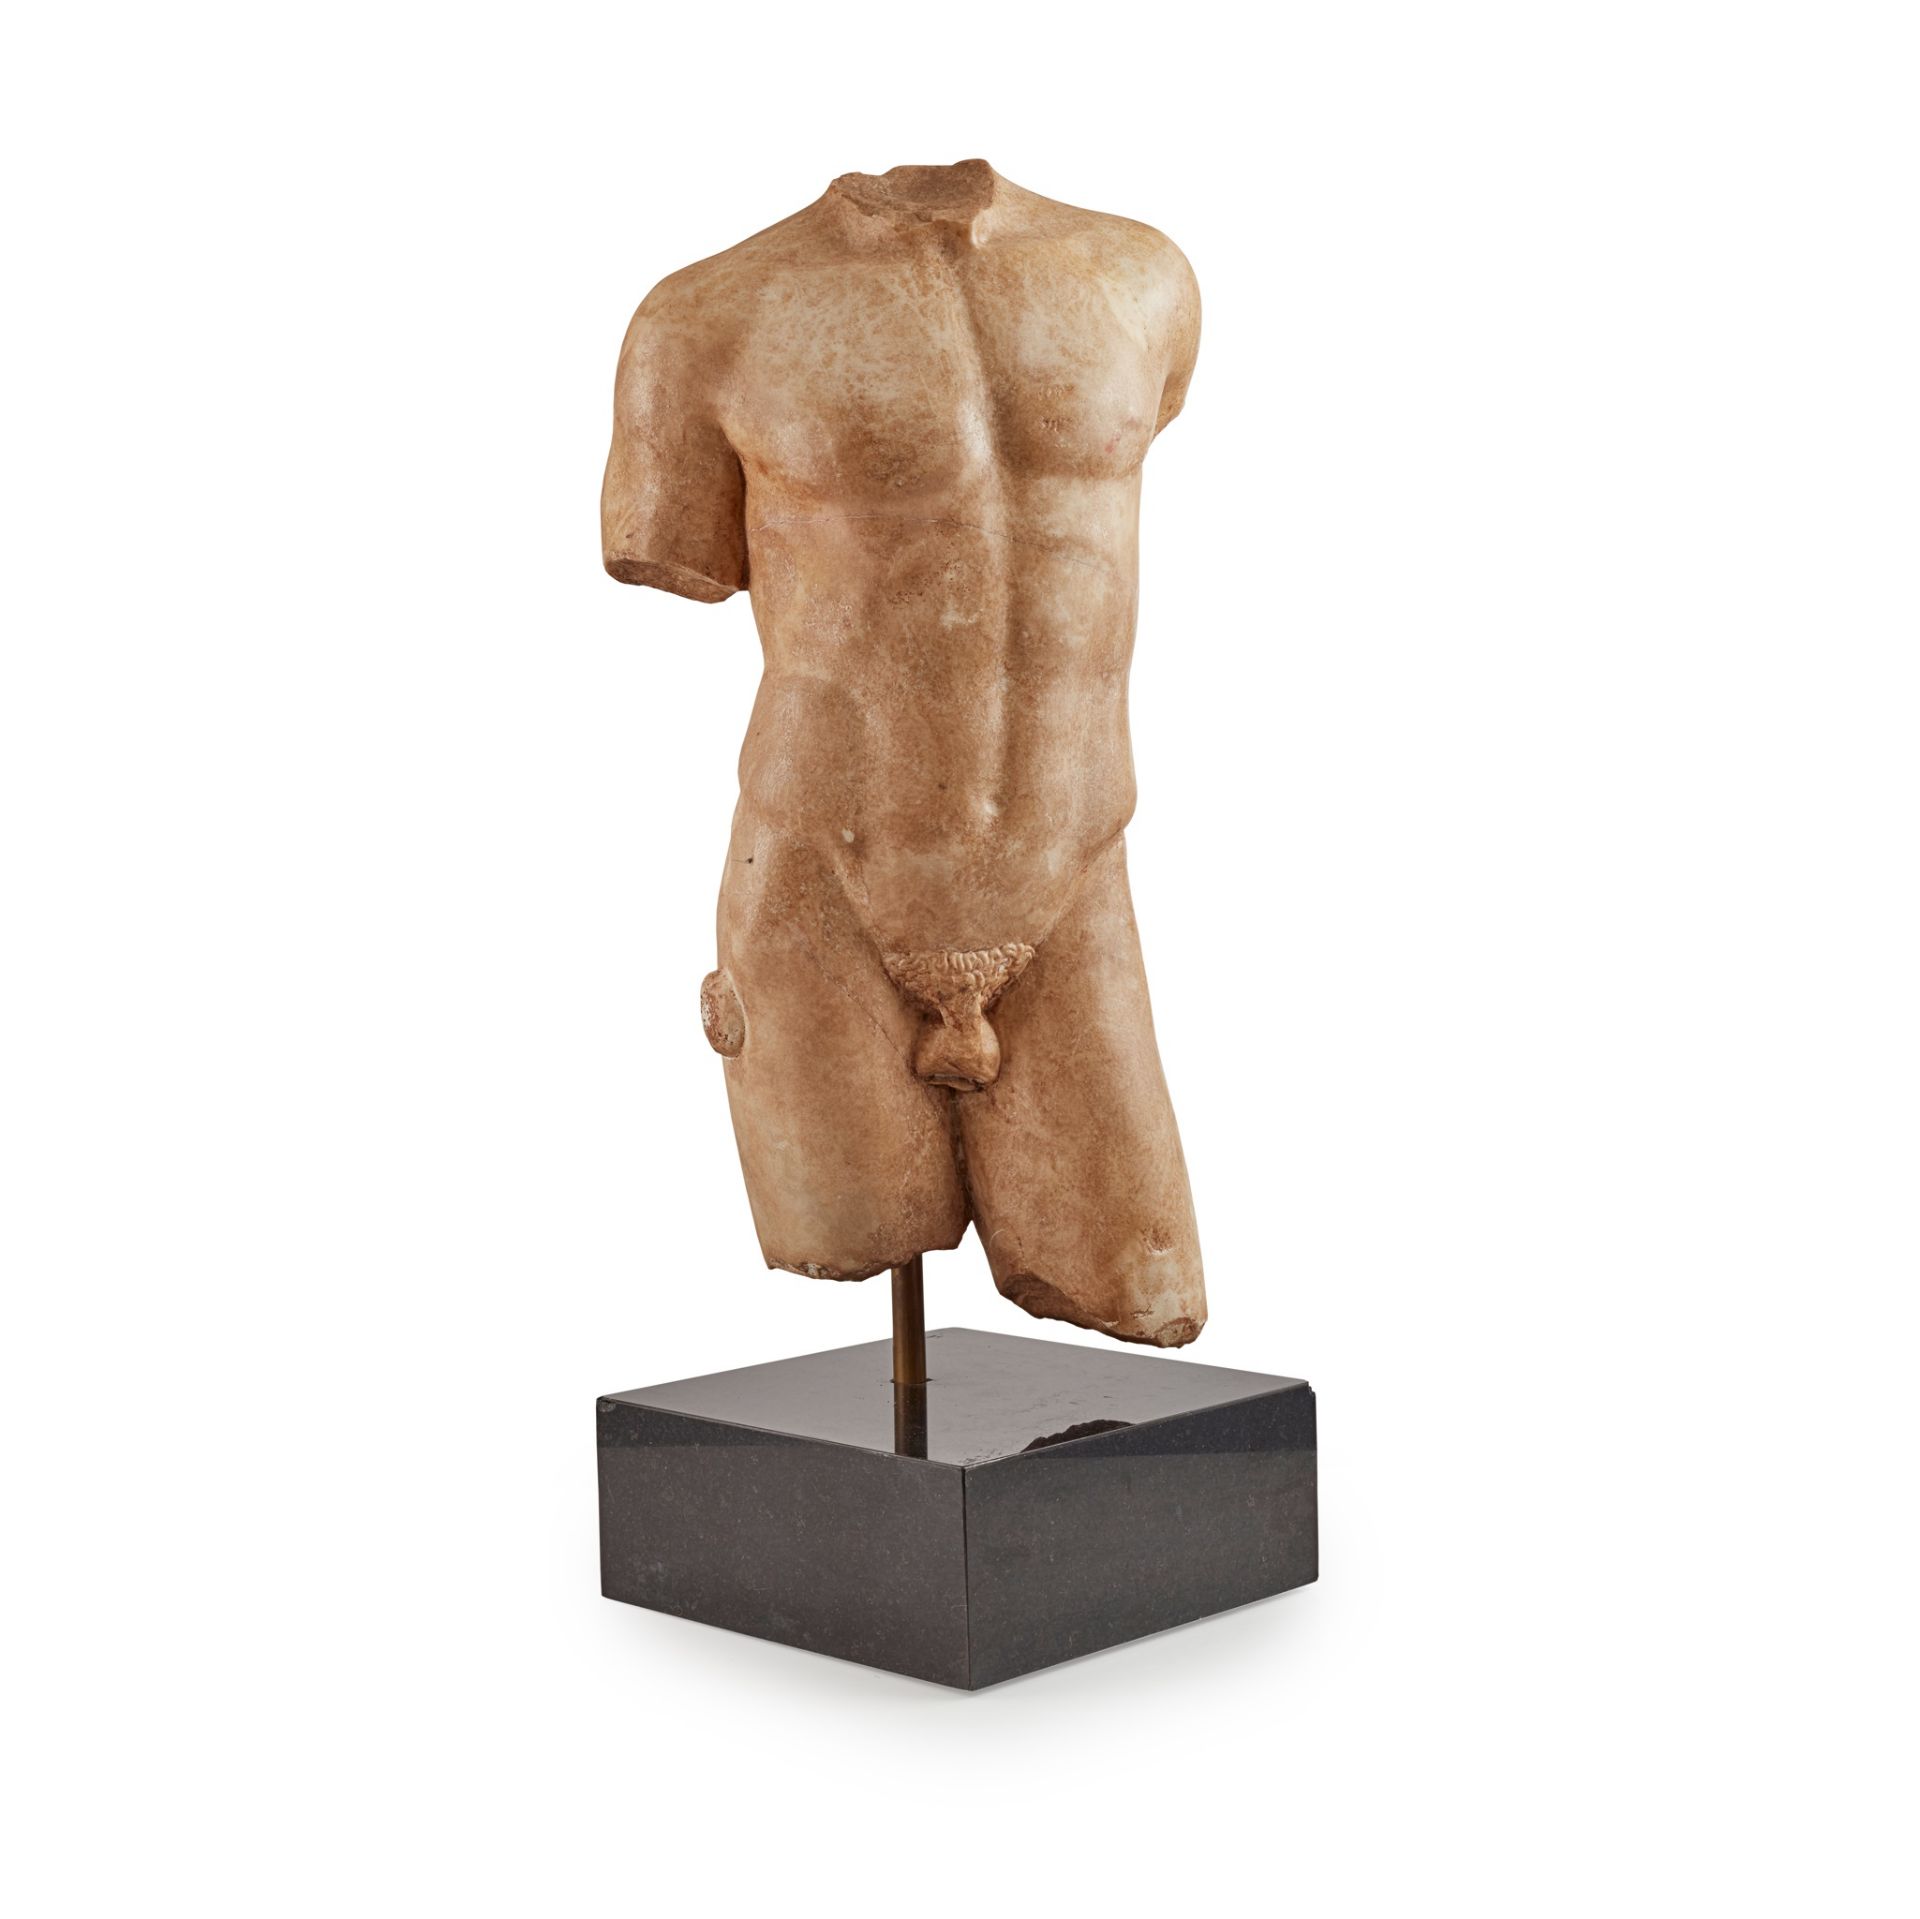 ◆ LIFE-SIZED ANCIENT ROMAN MARBLE TORSO OF A YOUNG MAN C. 1ST - 2ND CENTURY AD